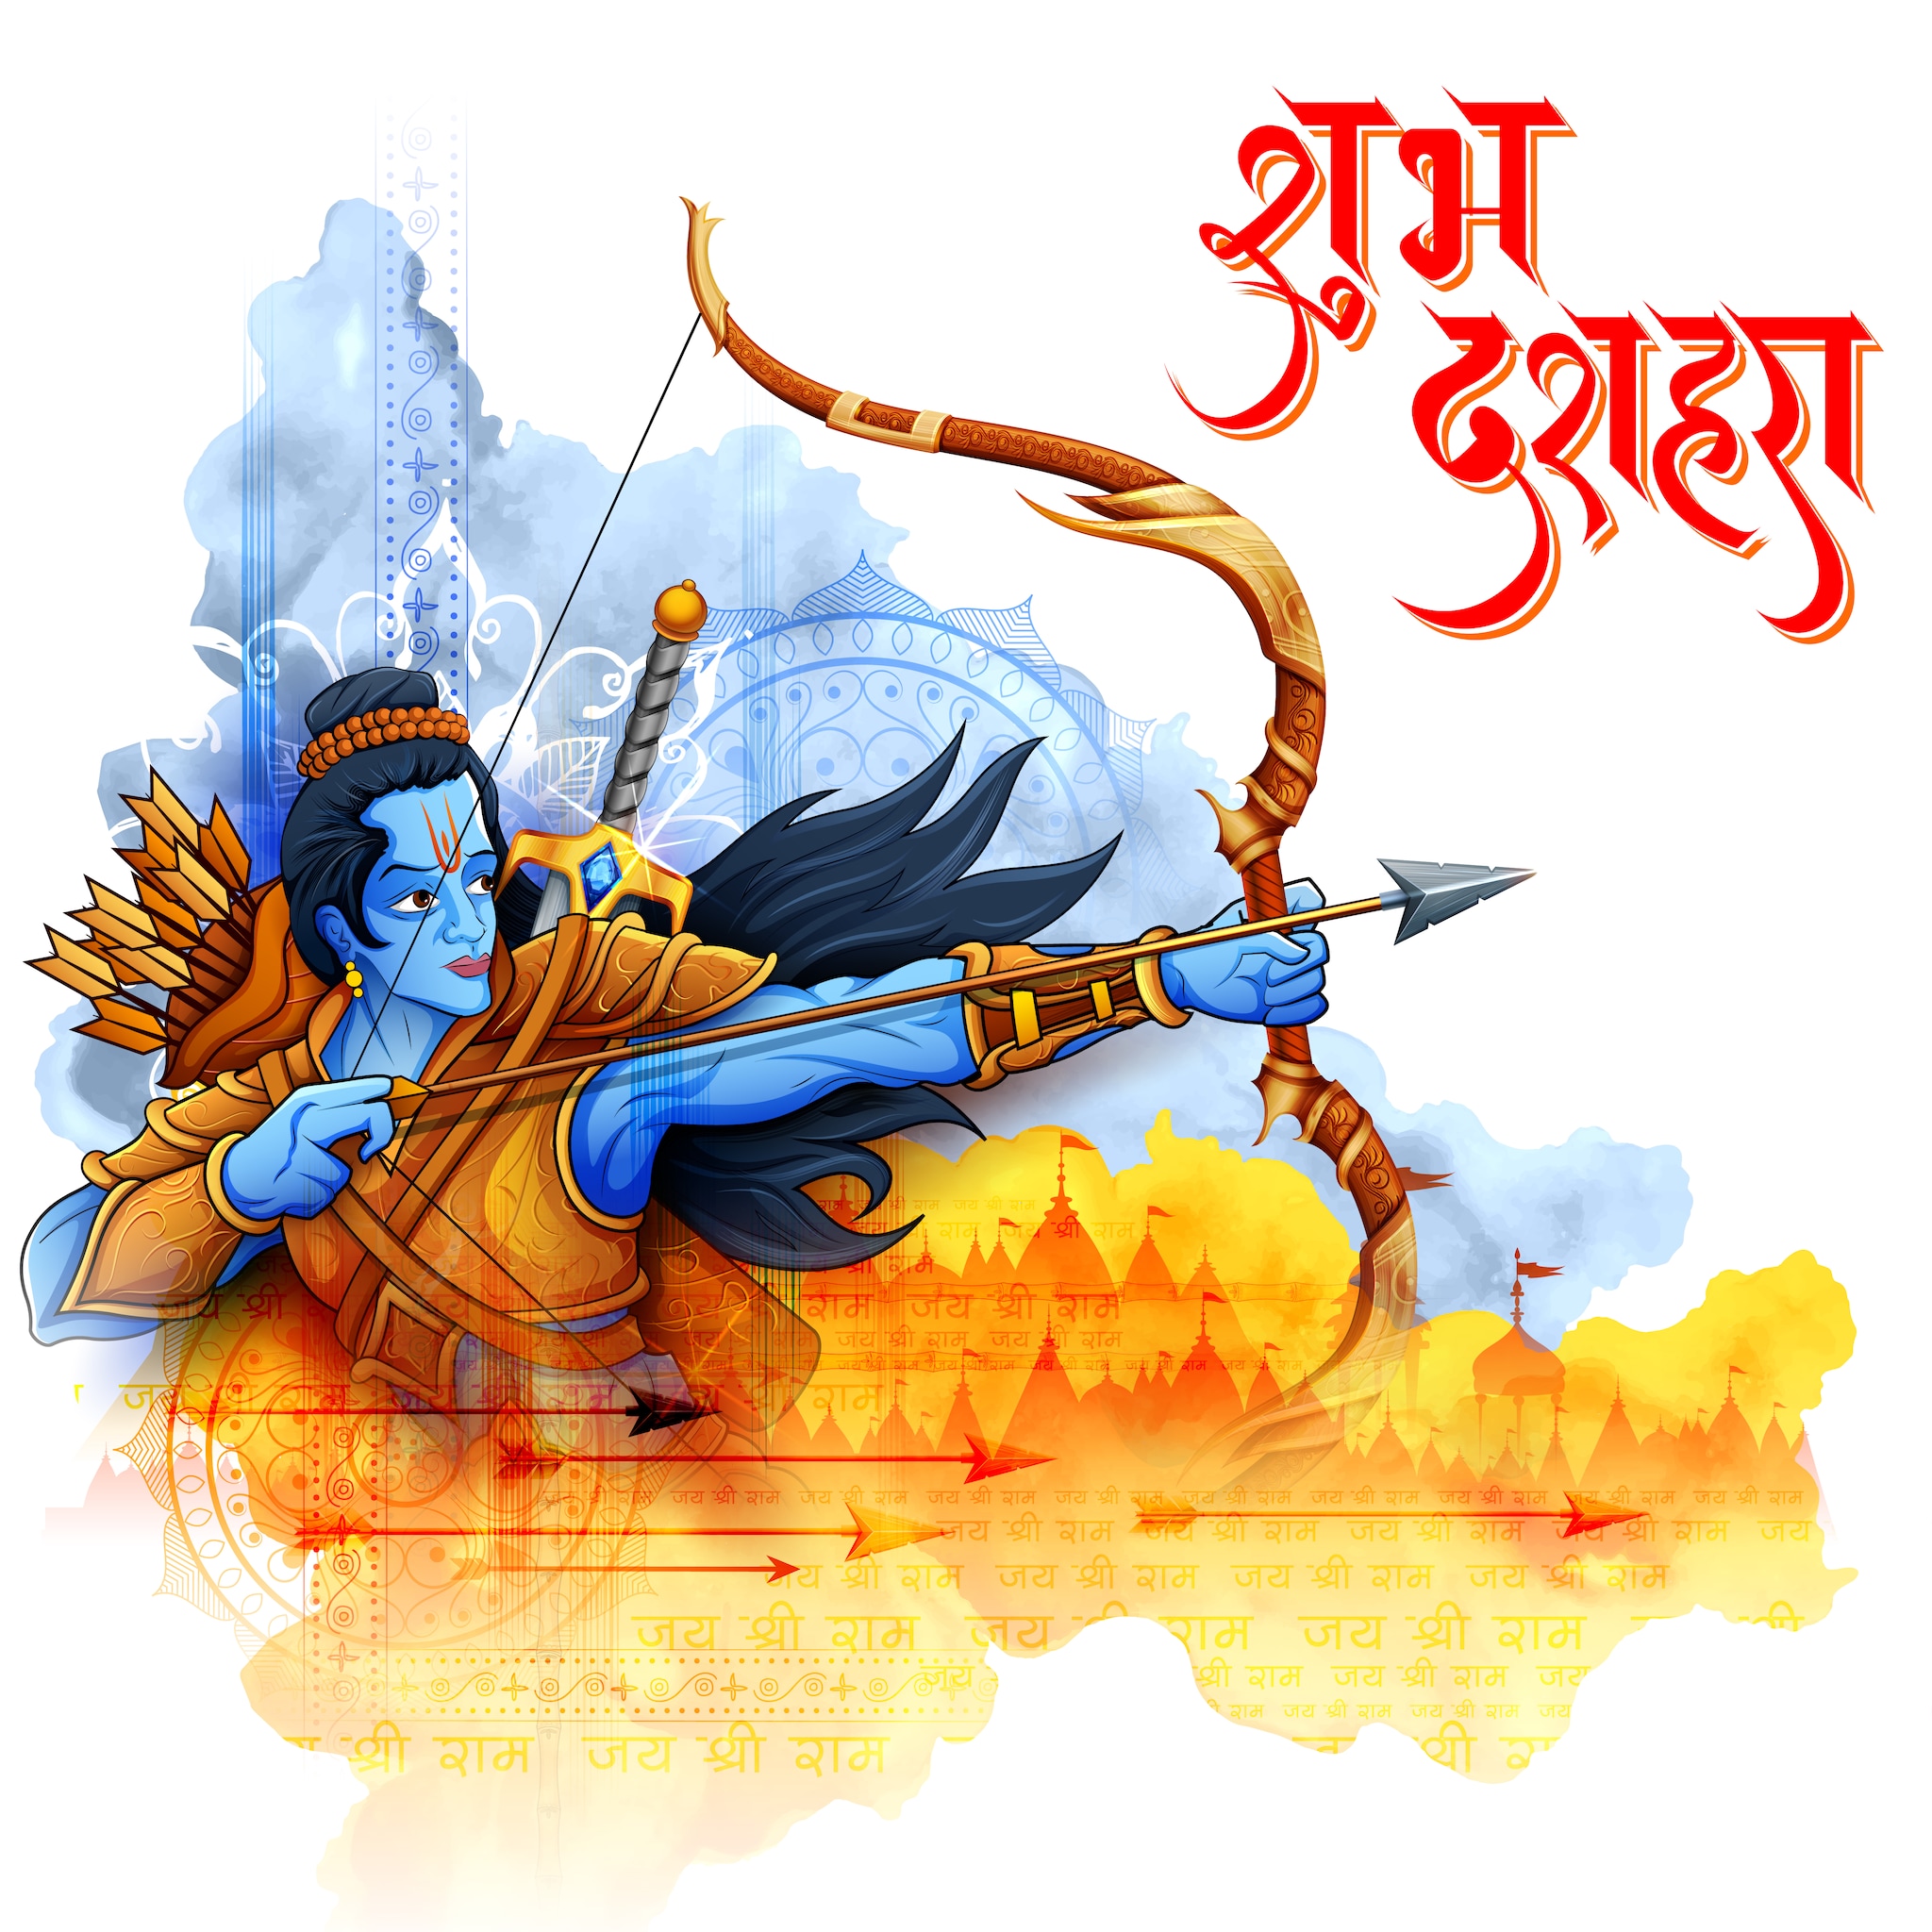 Happy Dussehra 2021 Images, Wishes, Quotes, Messages, and Whatsapp